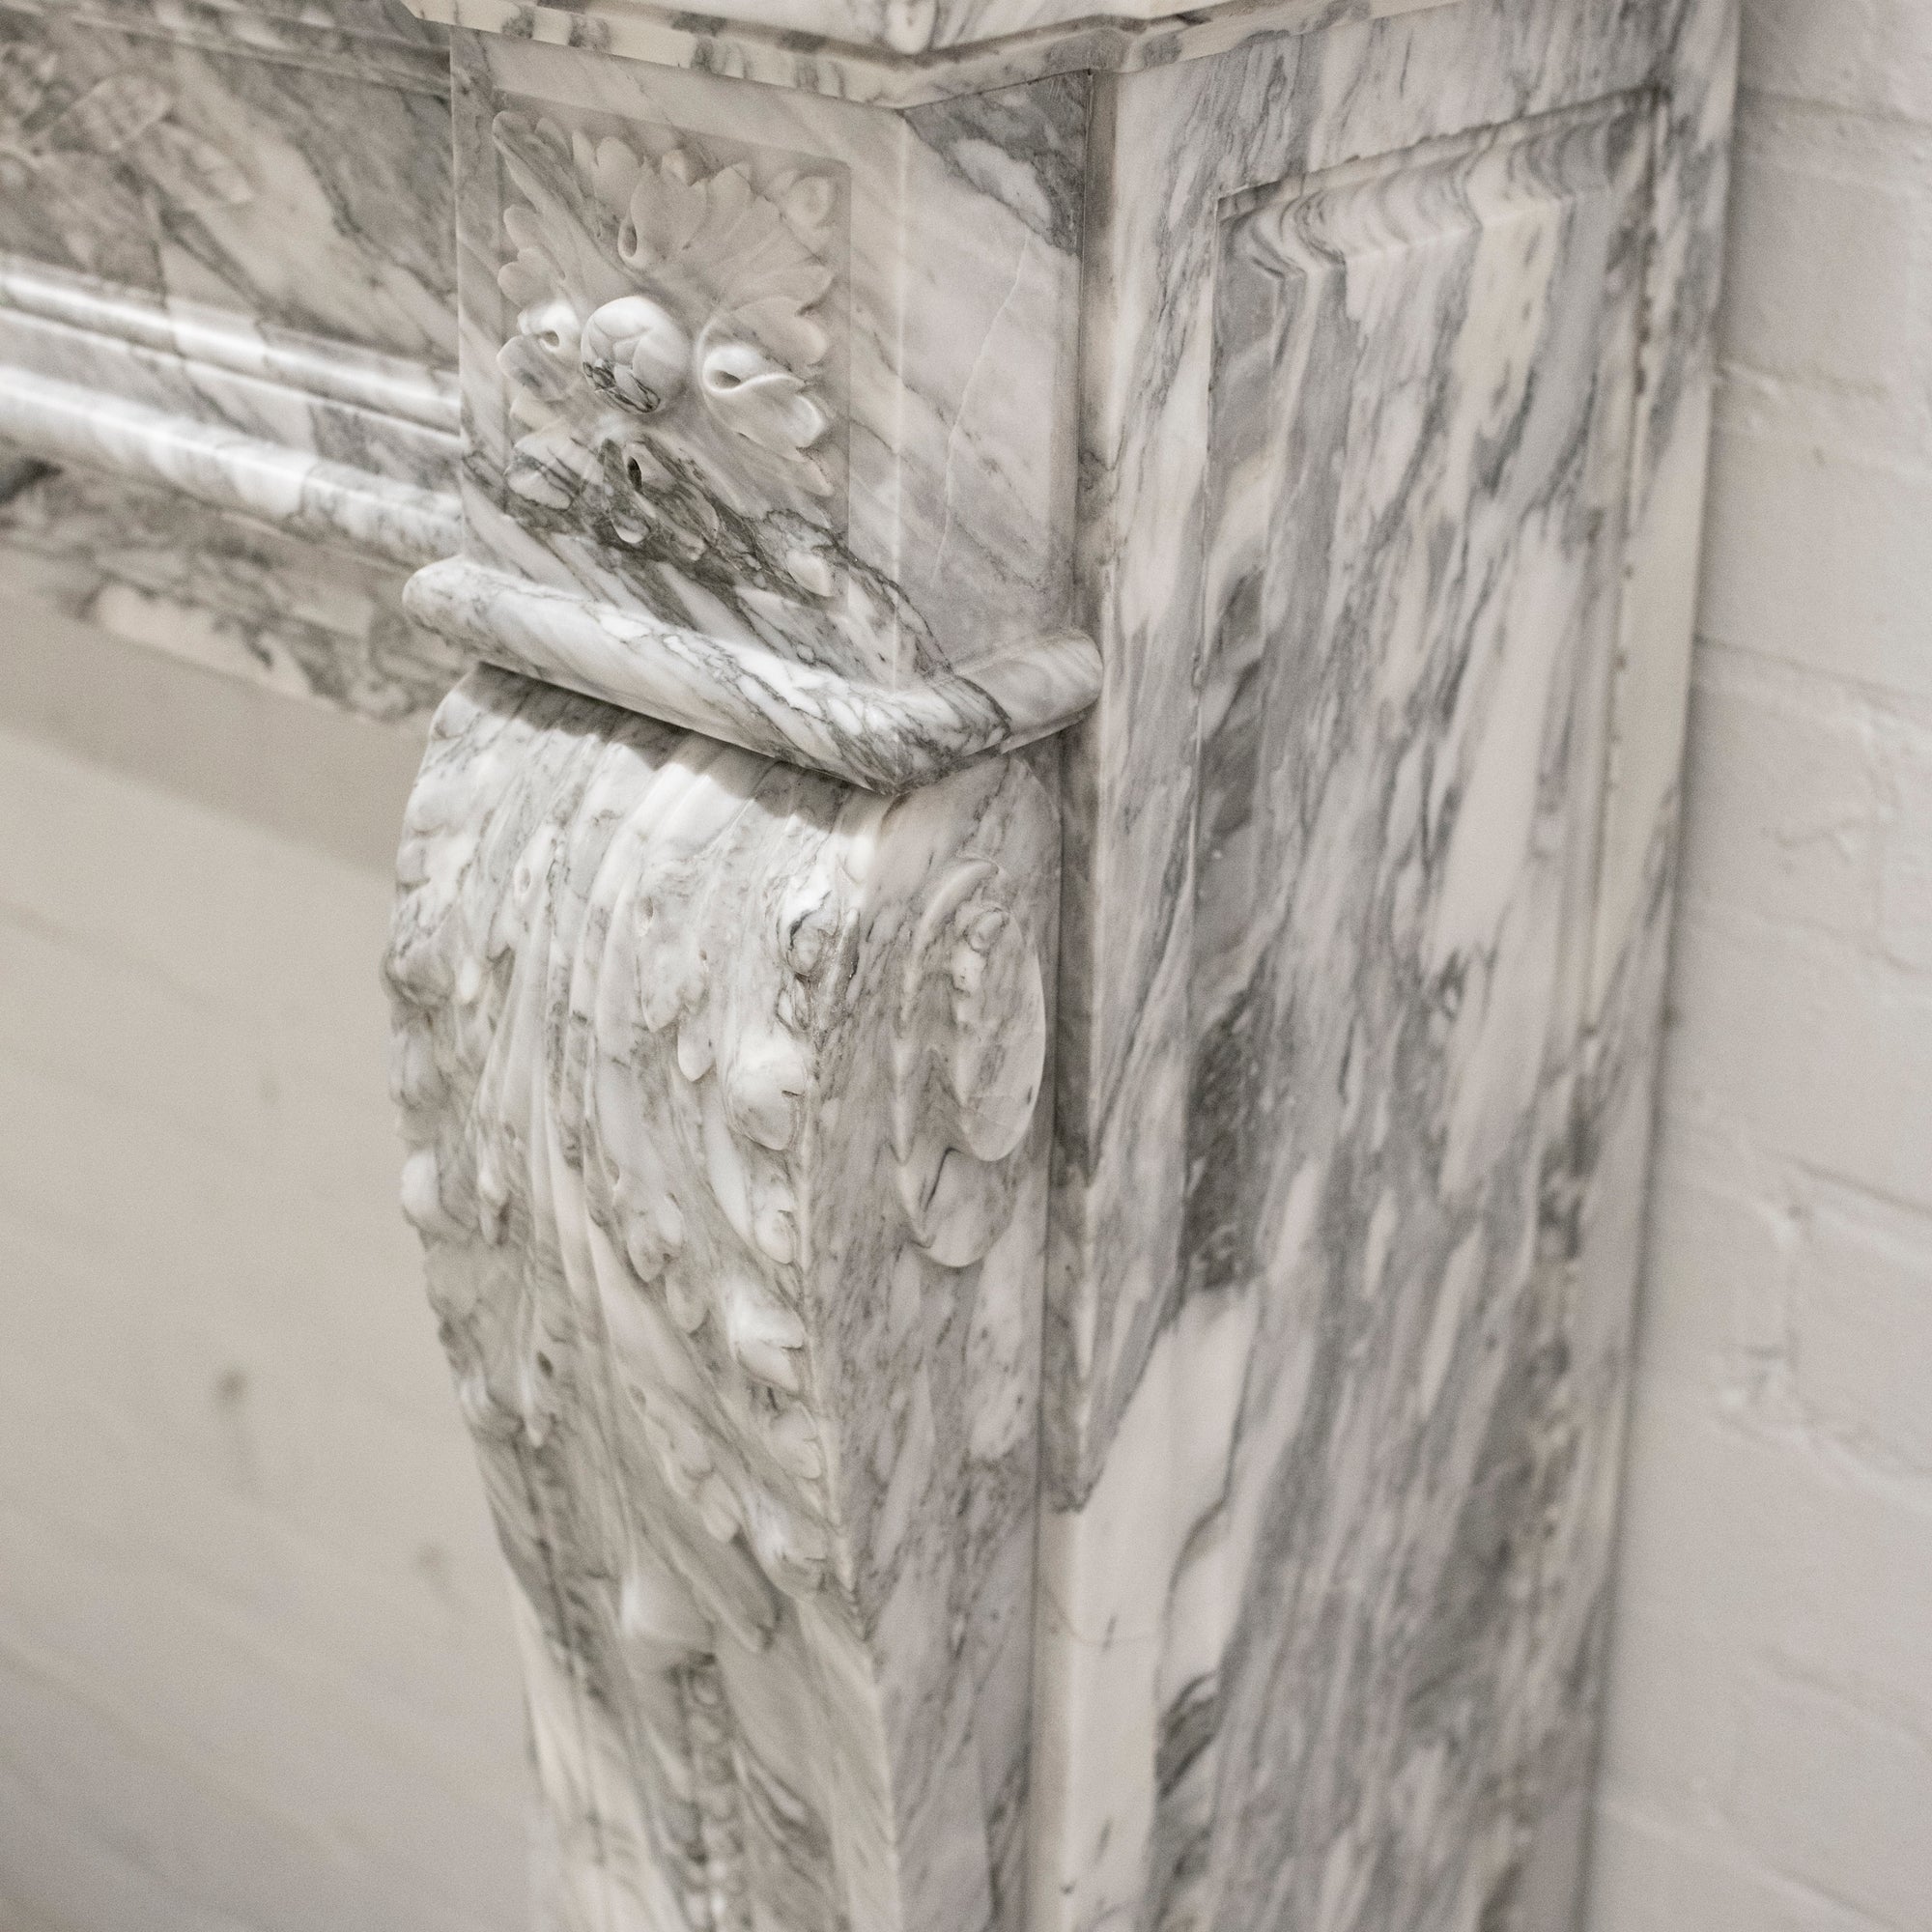 Antique Louis XVI Style Italian Marble Fireplace in Arabescato Marble | The Architectural Forum